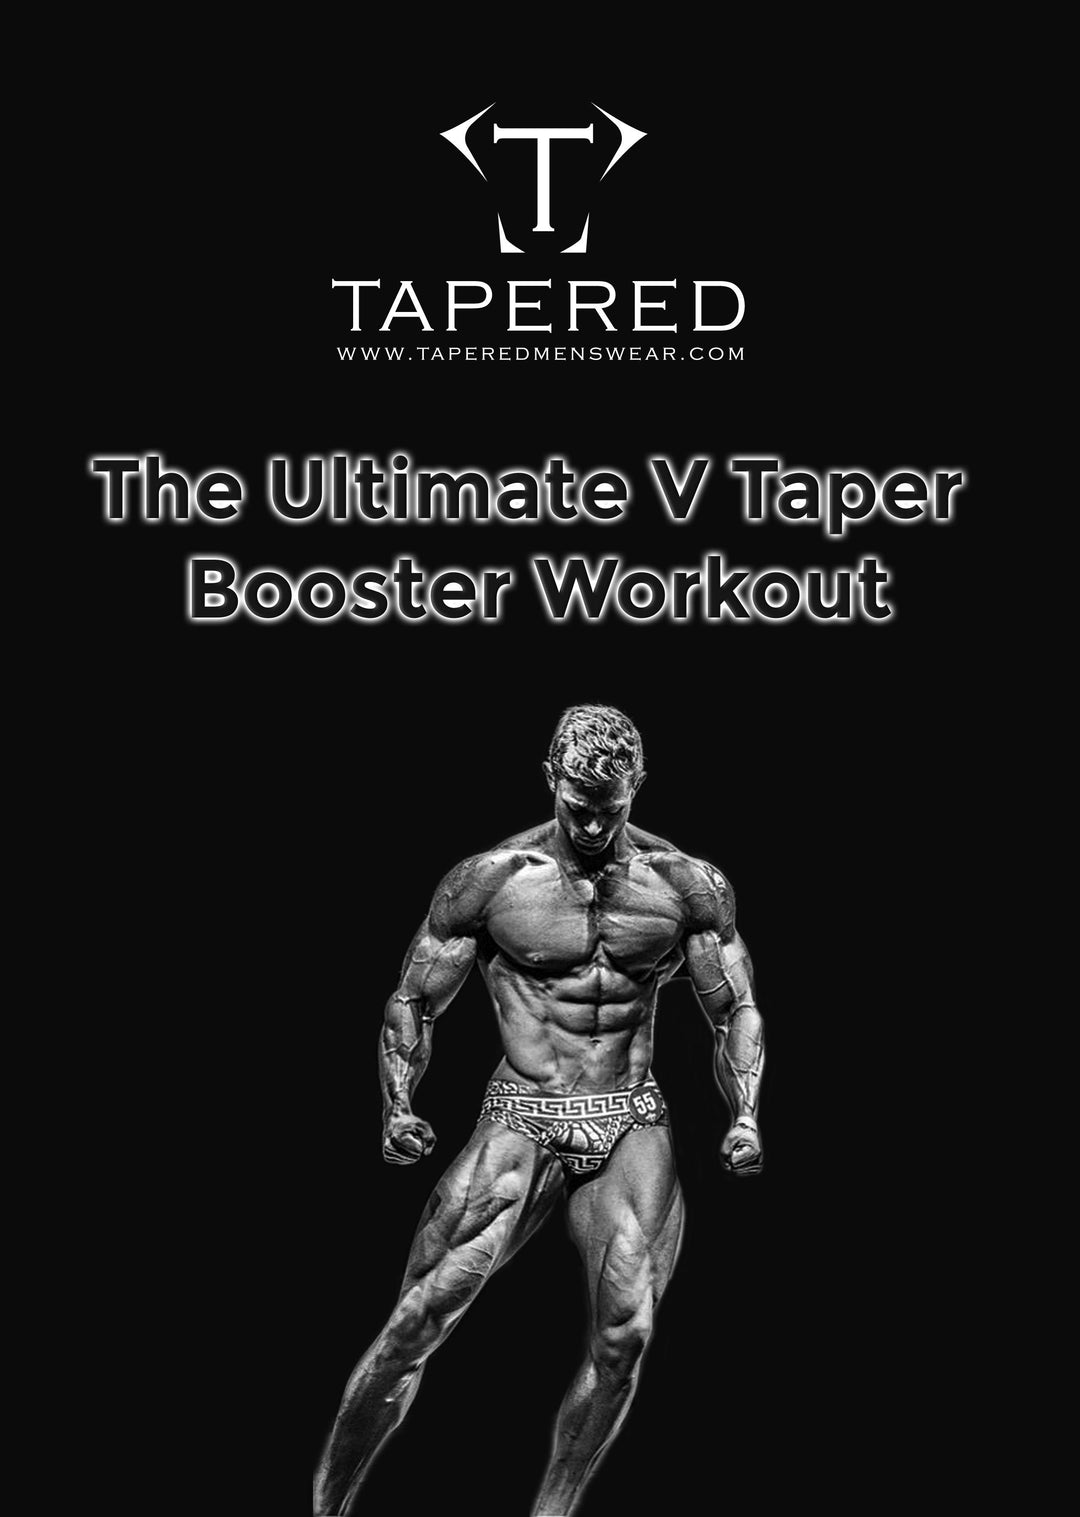 V Taper workout PDF. Ultimate V Taper workout by Tapered Menswear